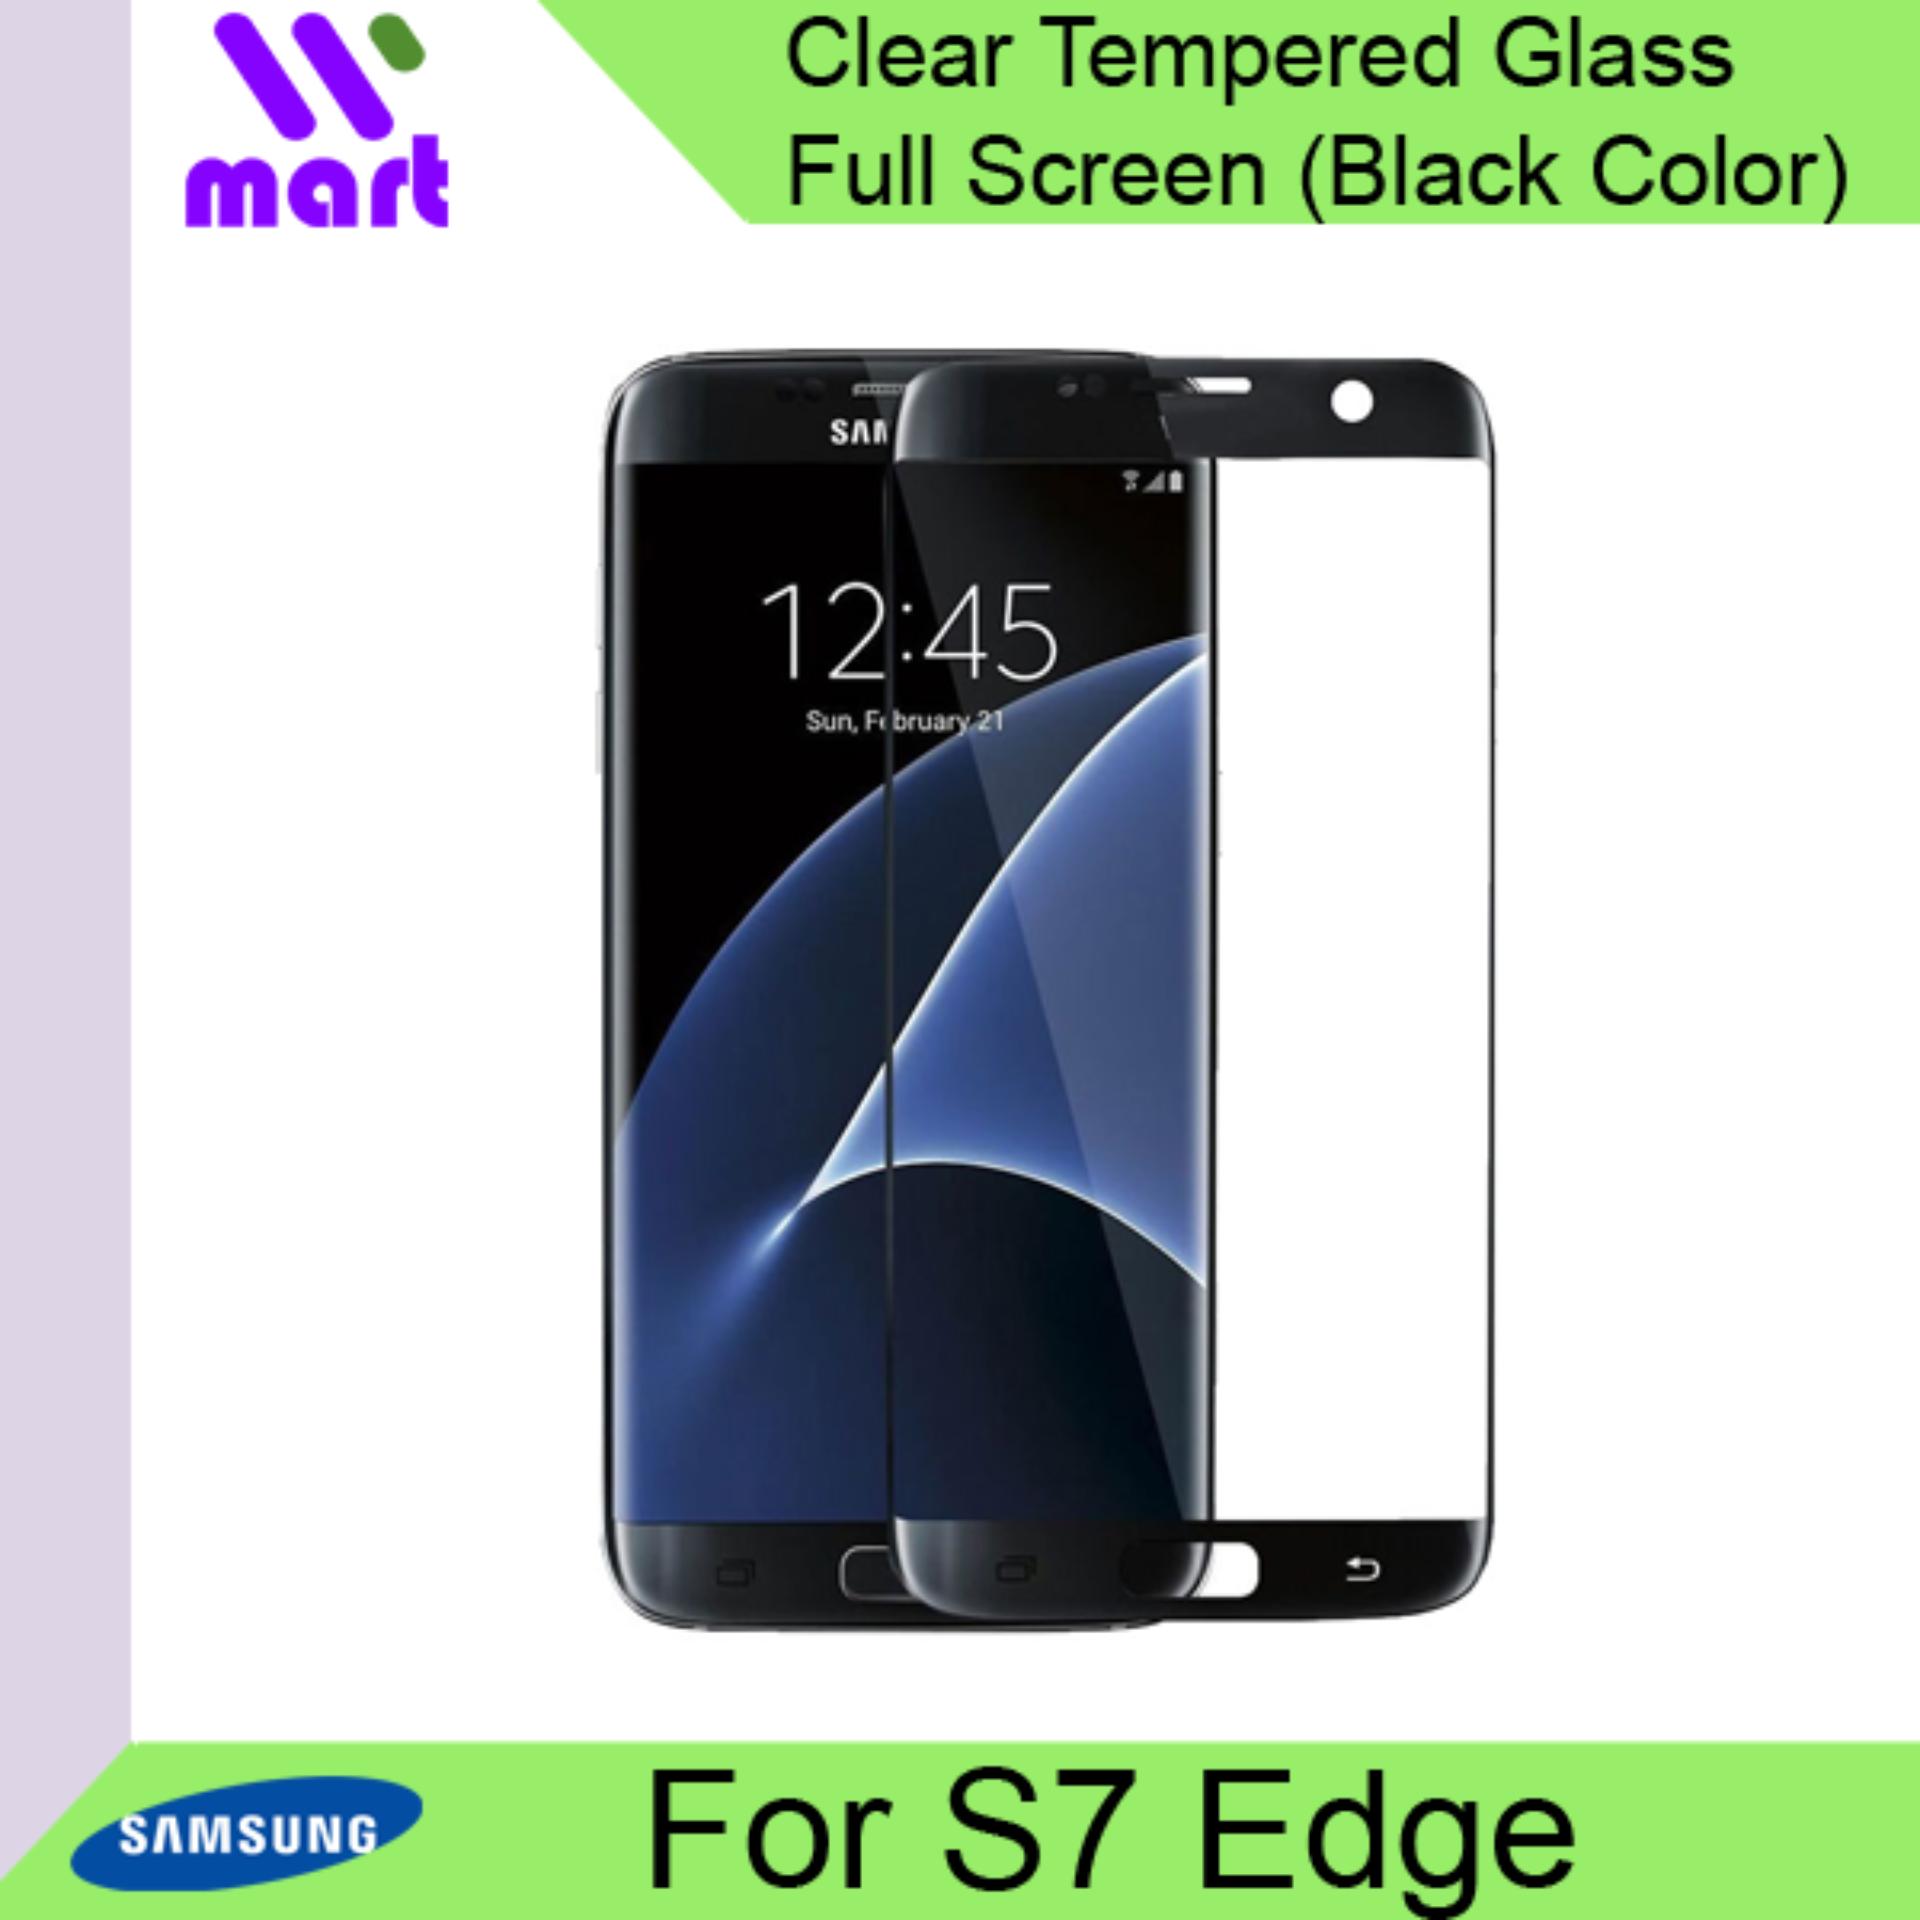 Tempered Glass Full Screen Protector (Black) For Samsung Galaxy S7 Edge